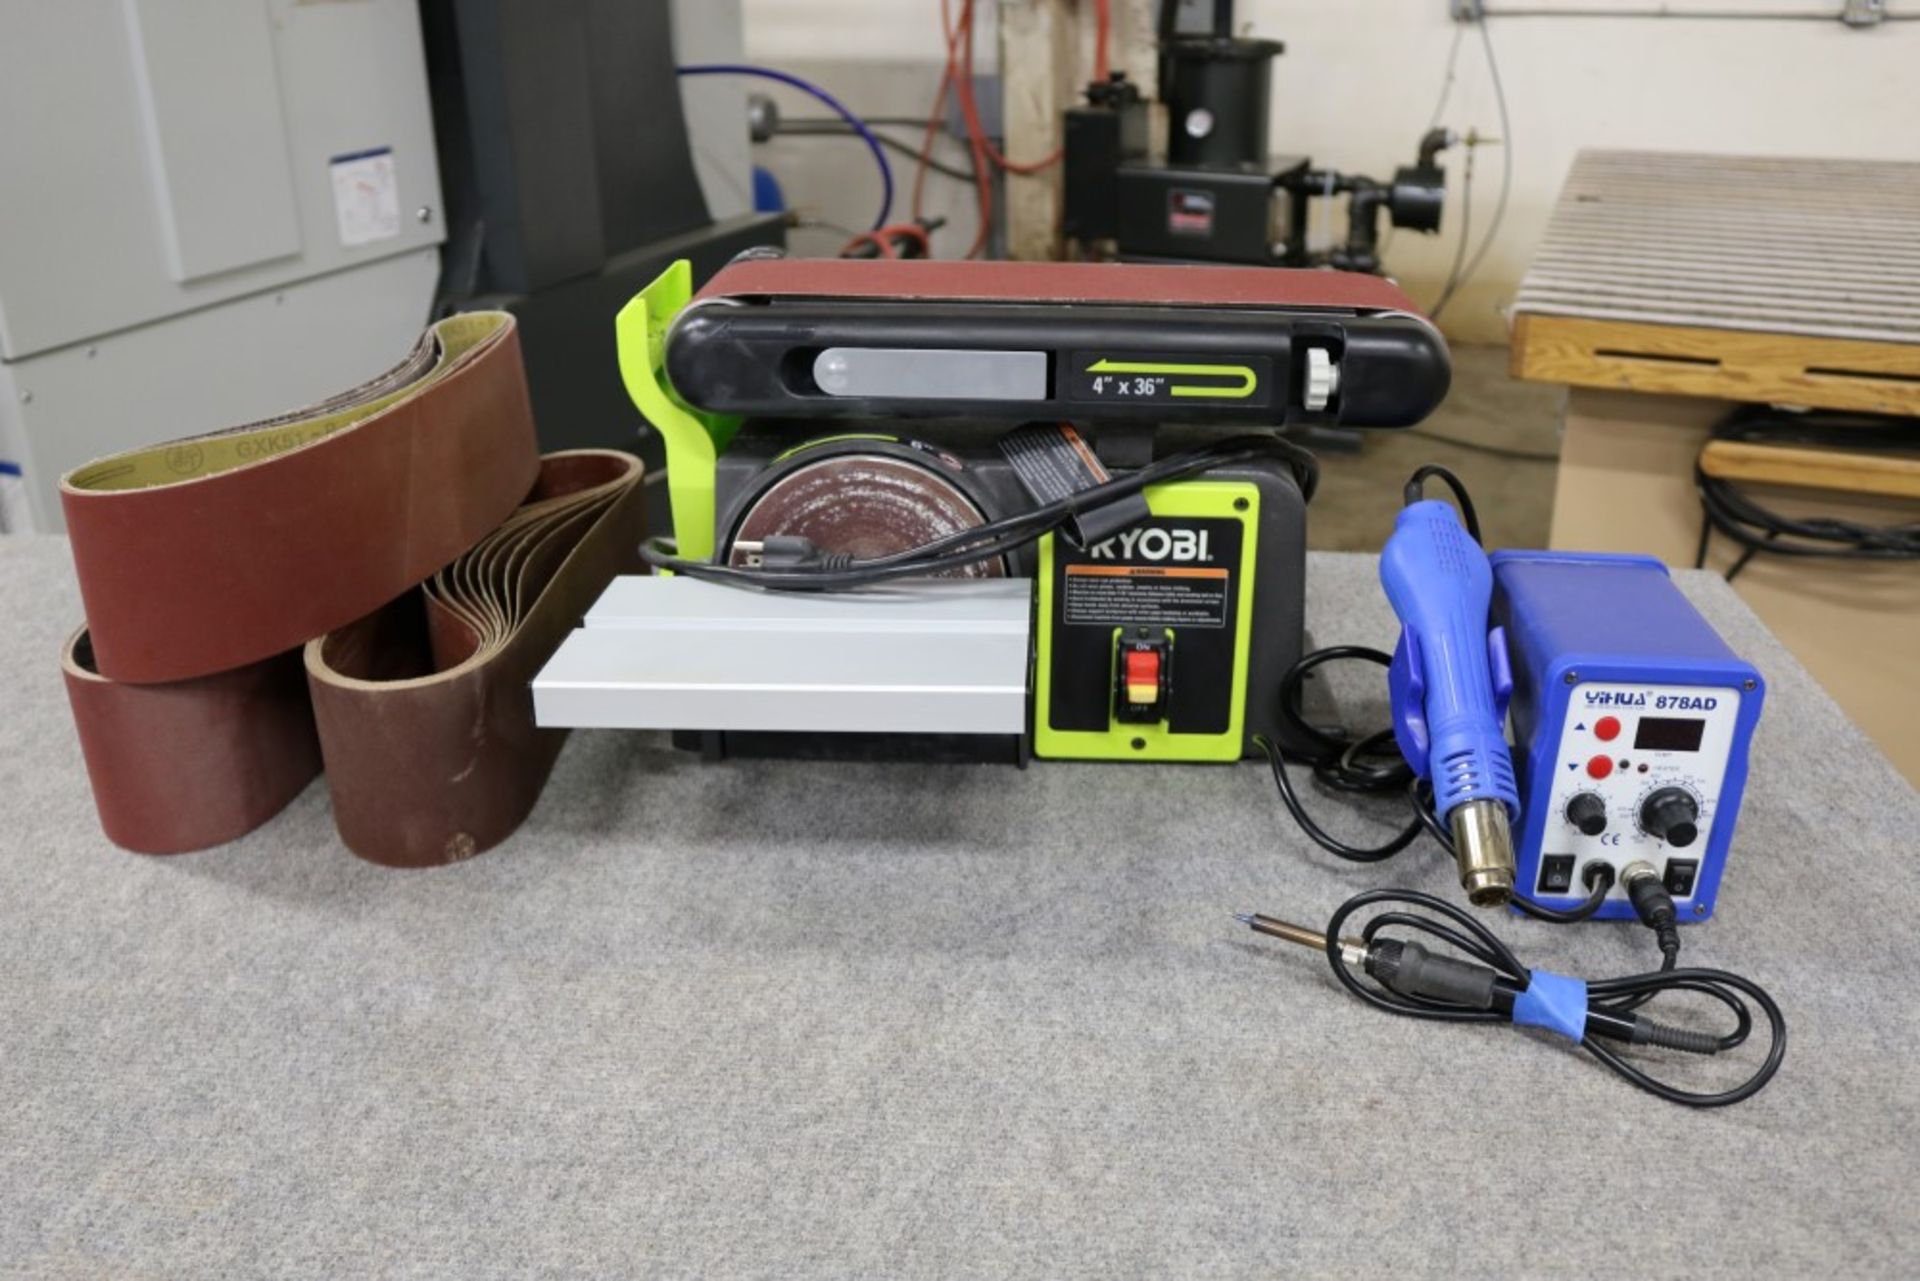 Ryobi 4" x 6" Belt and Disc Sander with Extra New Sanding Belts, also YiHua 878 AD- SMD ReWork